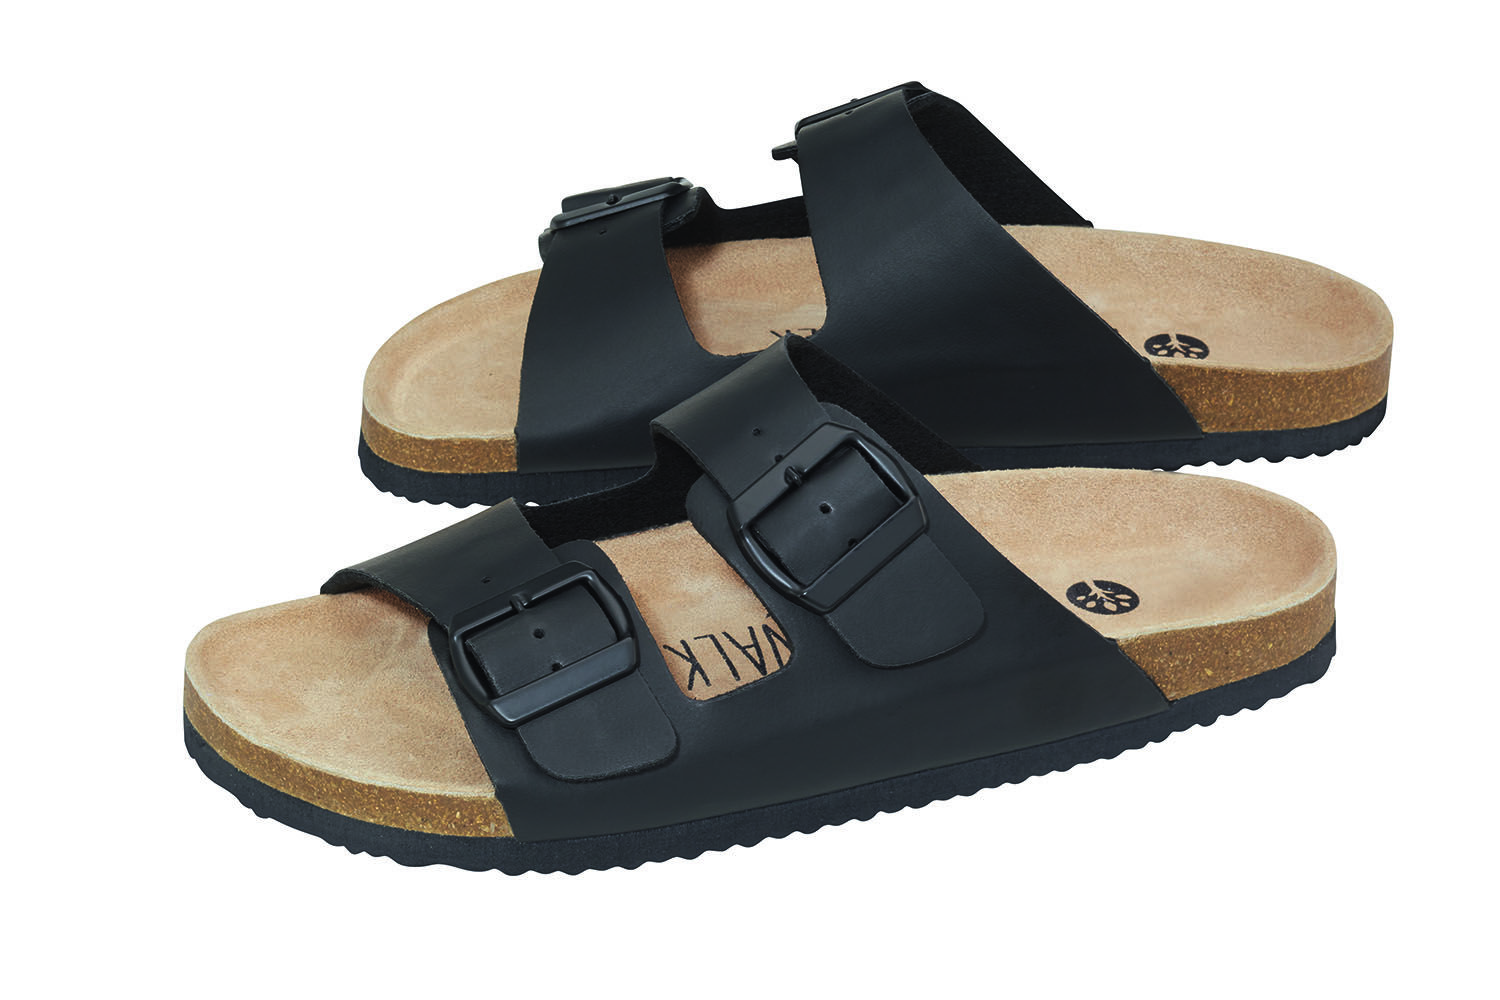 Lidl is seling sandals similar to 